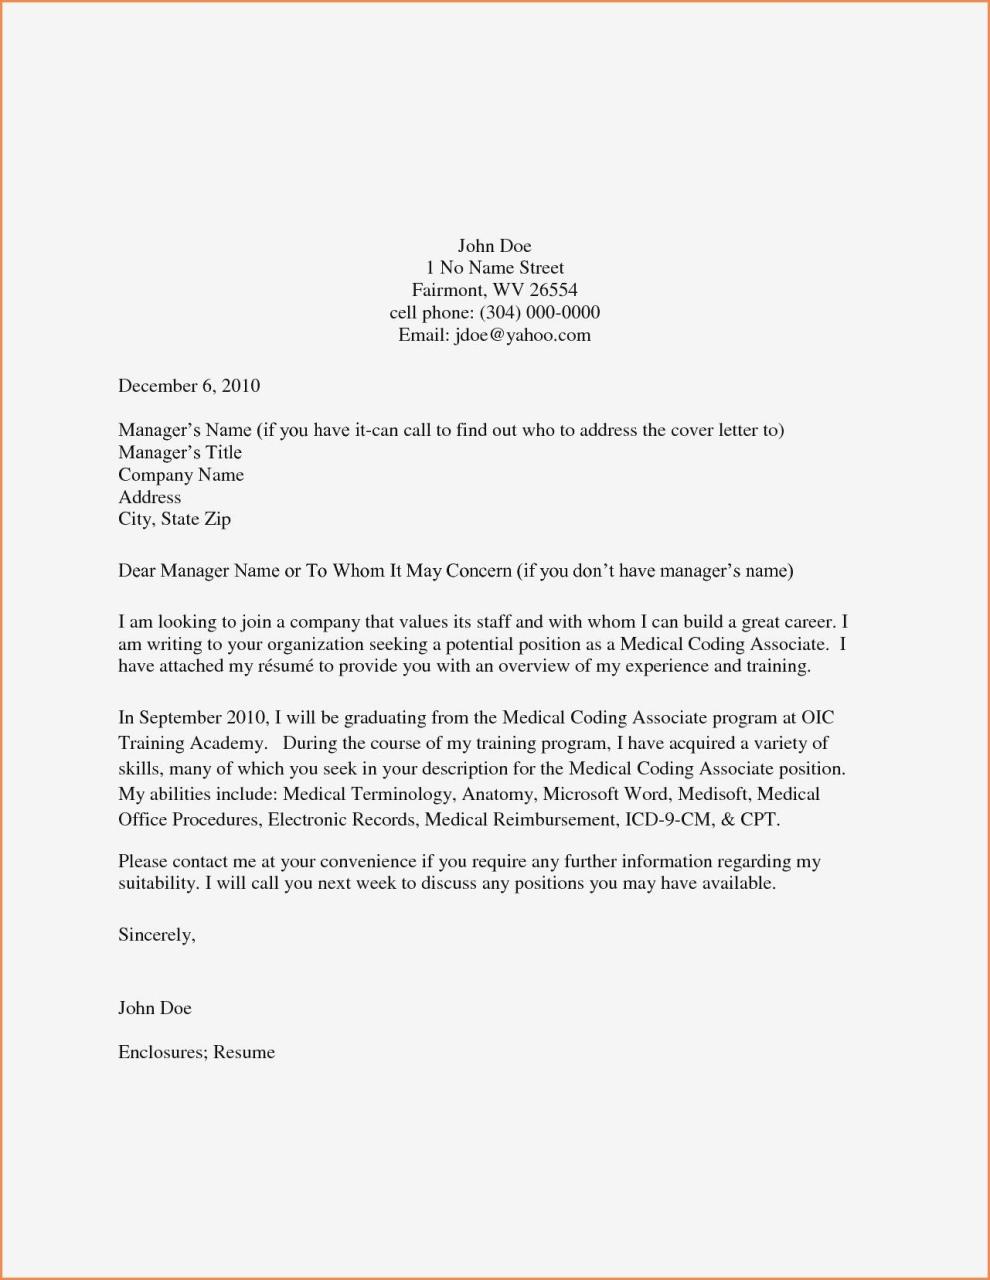 Addressing Cover Letter With No Name Database Letter Template Collection